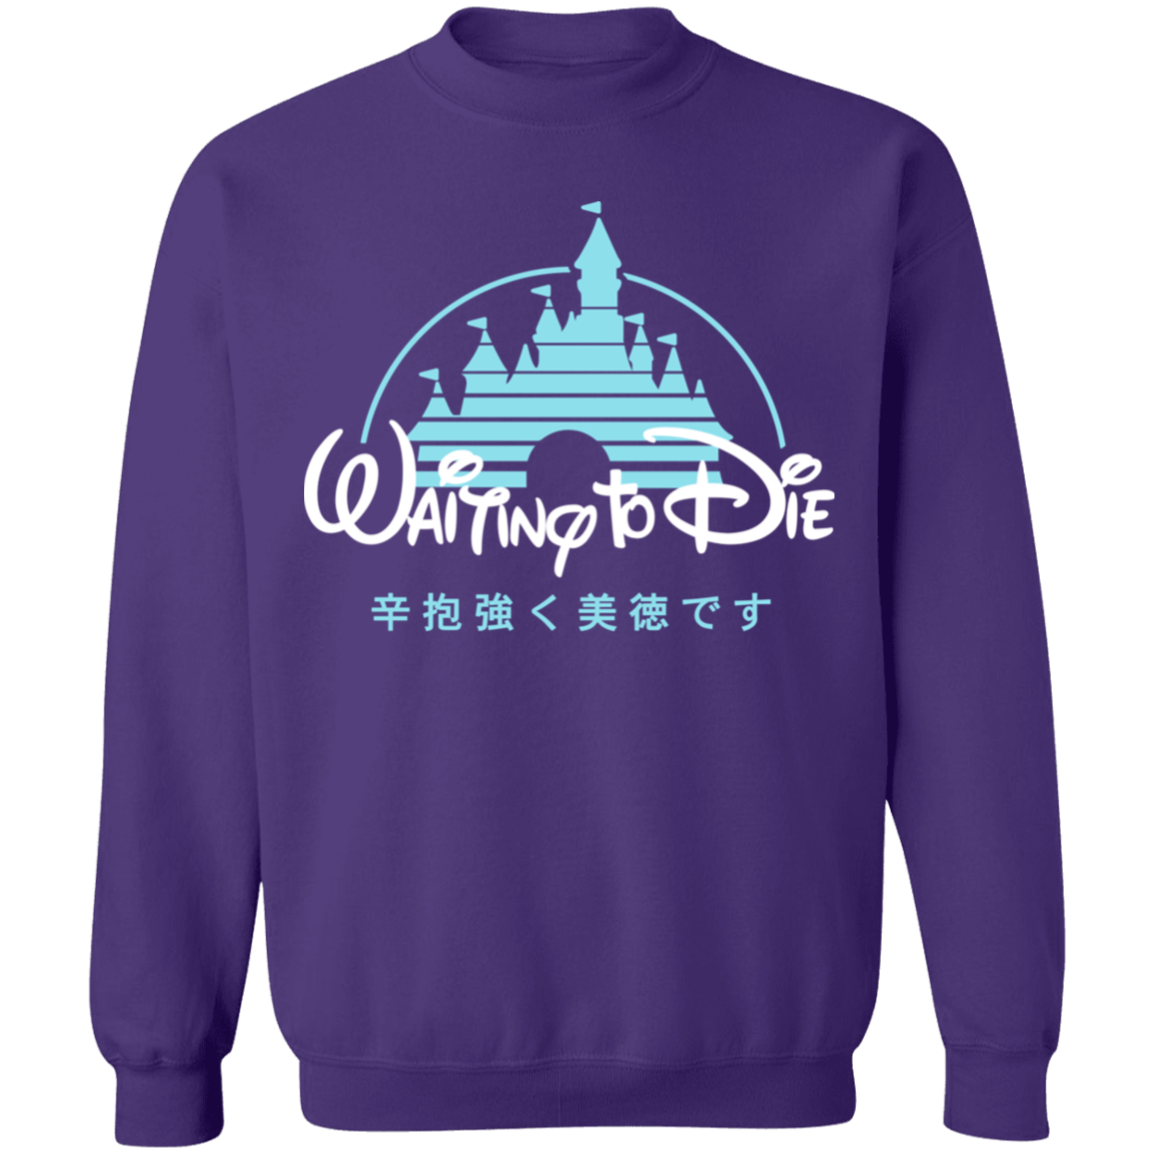 Waiting to Die Crewneck Sweatshirt by palm-treat.myshopify.com for sale online now - the latest Vaporwave &amp; Soft Grunge Clothing